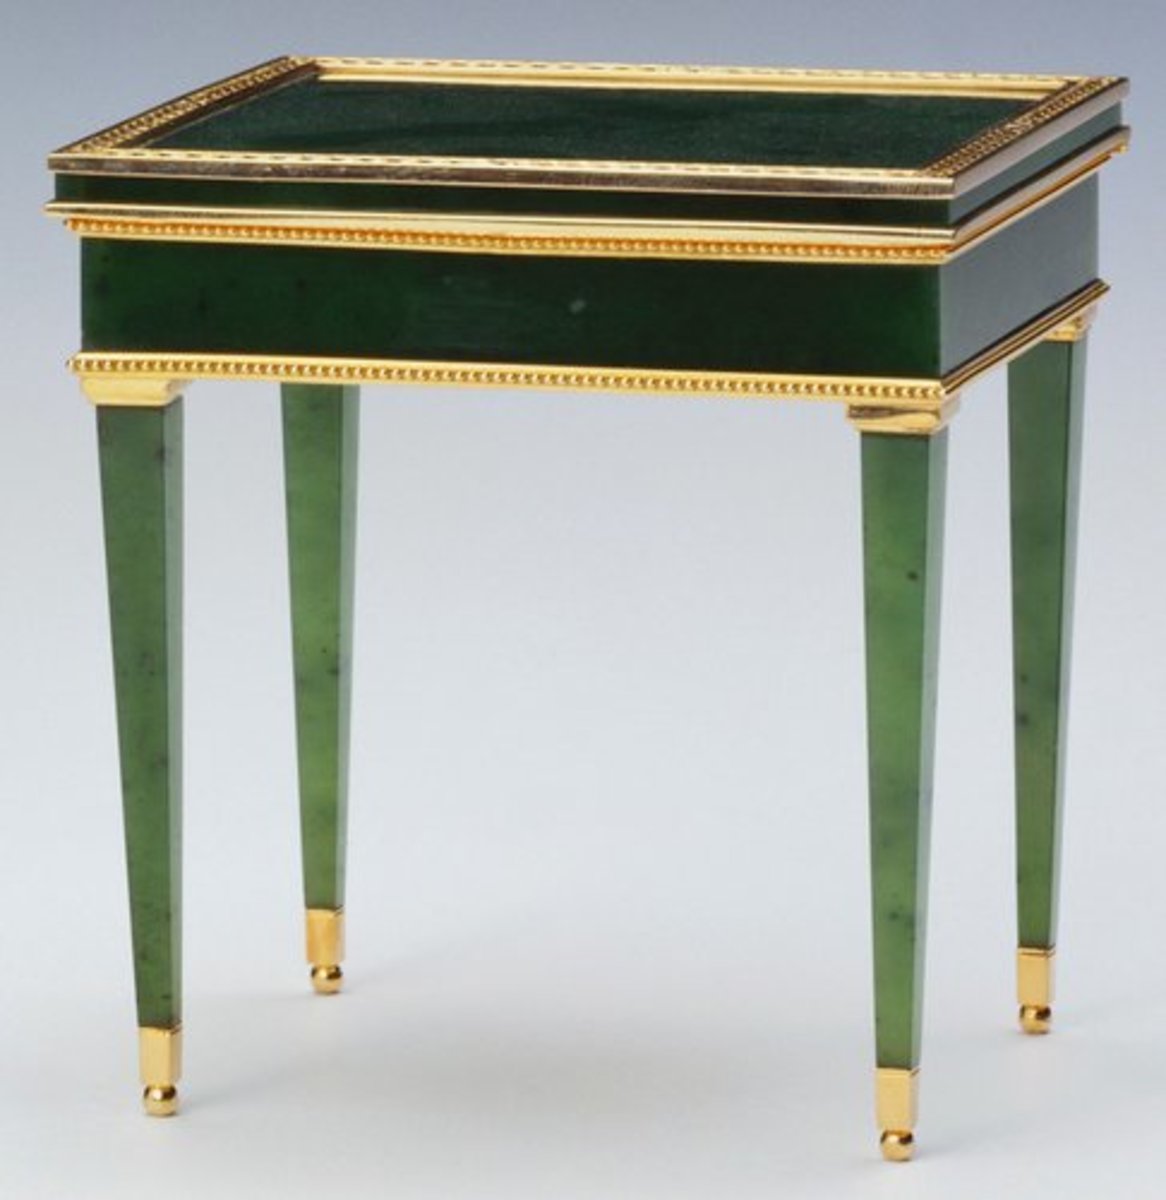 Rectangular miniature Louis XVI-style table by workmaster Mikhail Perkhin, 1896-1903, is made of nephrite and mounted with red gold borders and has tapering legs with gold feet and a chased lid with leaves around edge and is hinged; 3” x 2.7” x 2”. Fabergé produced a number of bibelots in the form of miniature furniture. Some, such as this table, were intended to be used as bonbonnières, fancy boxes for bonbons. This was a Christmas present for Queen Mary by Lord Revelstoke in 1921.